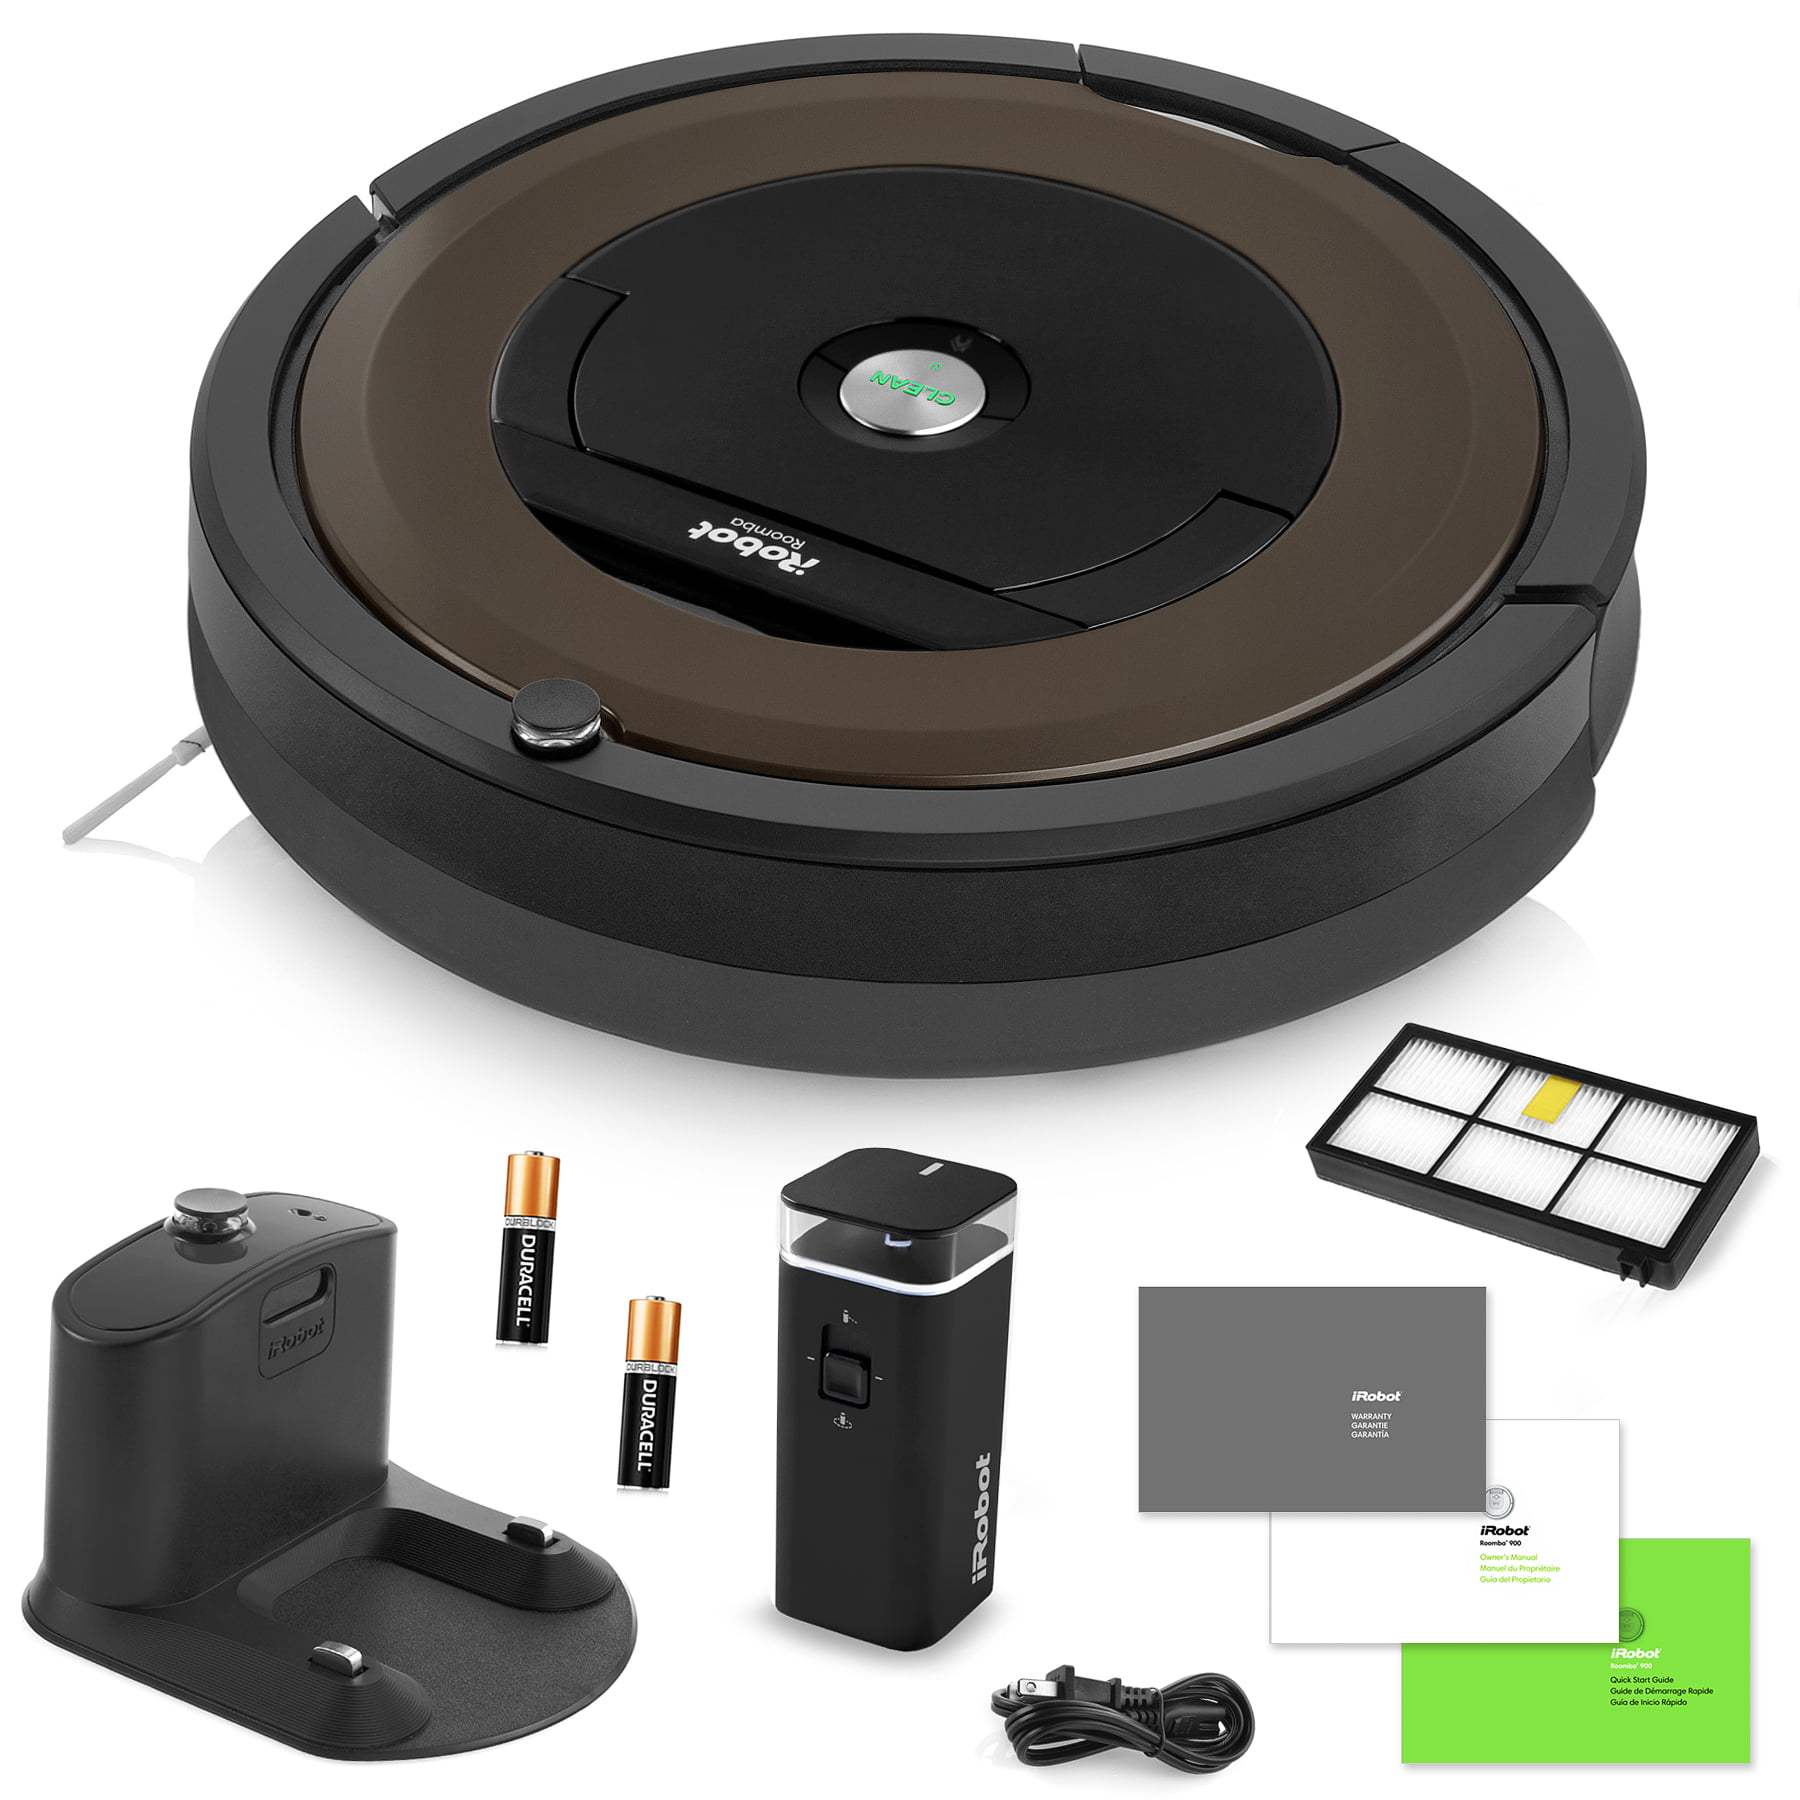 iRobot Roomba 890 Robot Vacuum Cleaner with Wi-Fi Connectivity Works with Alexa Carpets Ideal for Pet Hair & Hard Floor Surfaces R890020 